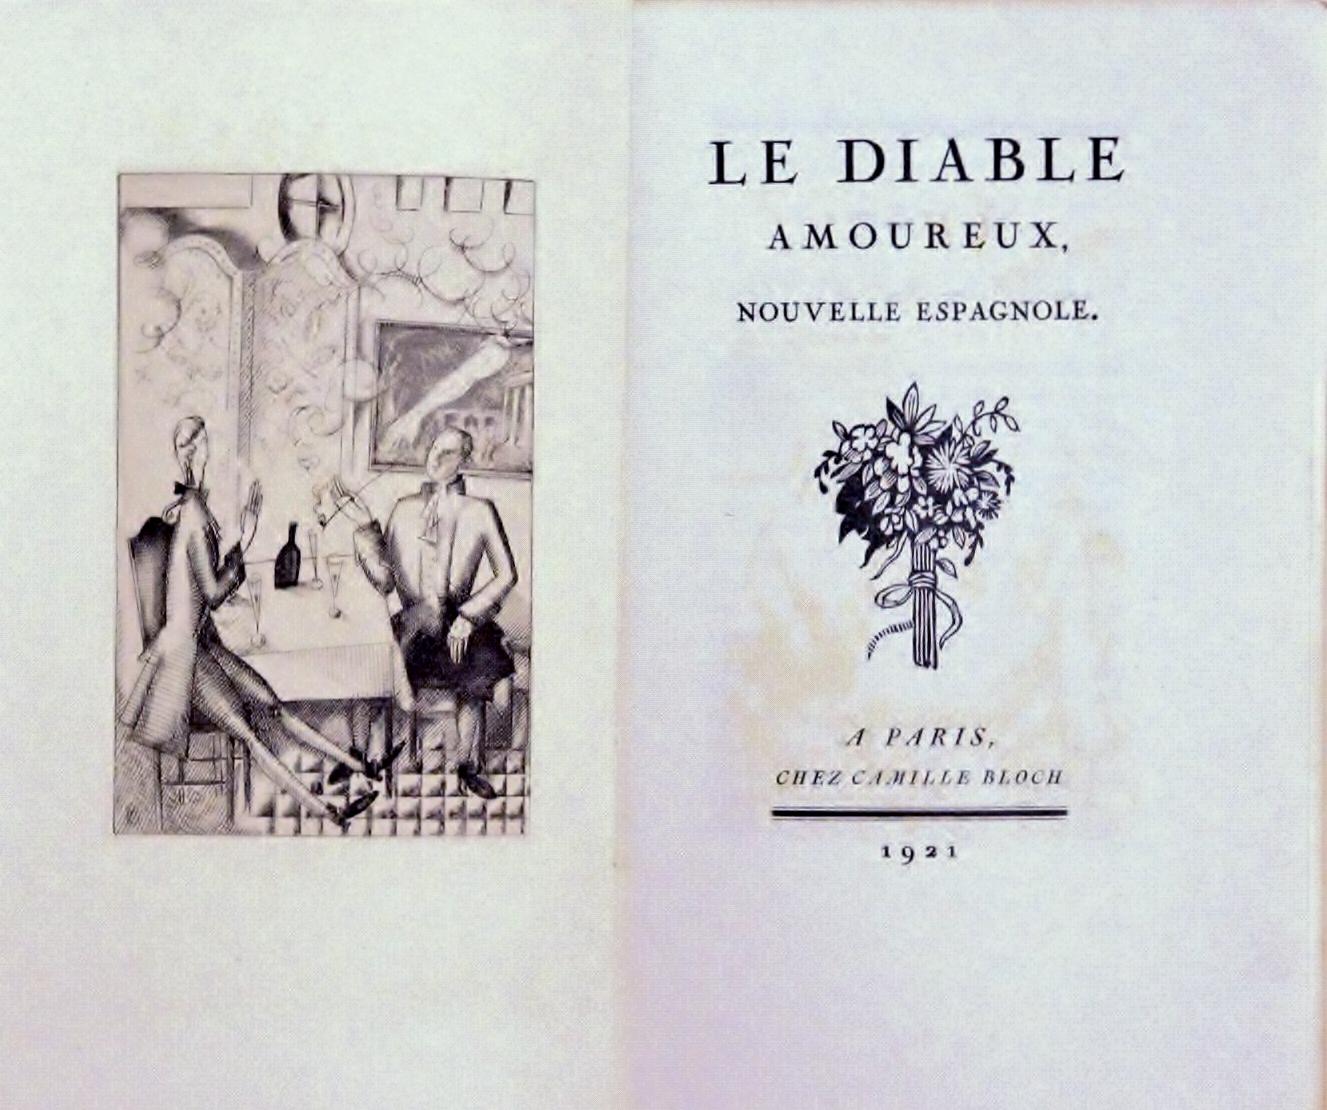 Le Diable Amoureux - Rare Book Illustrated by Jean Emile Laboreur - 1921 For Sale 1